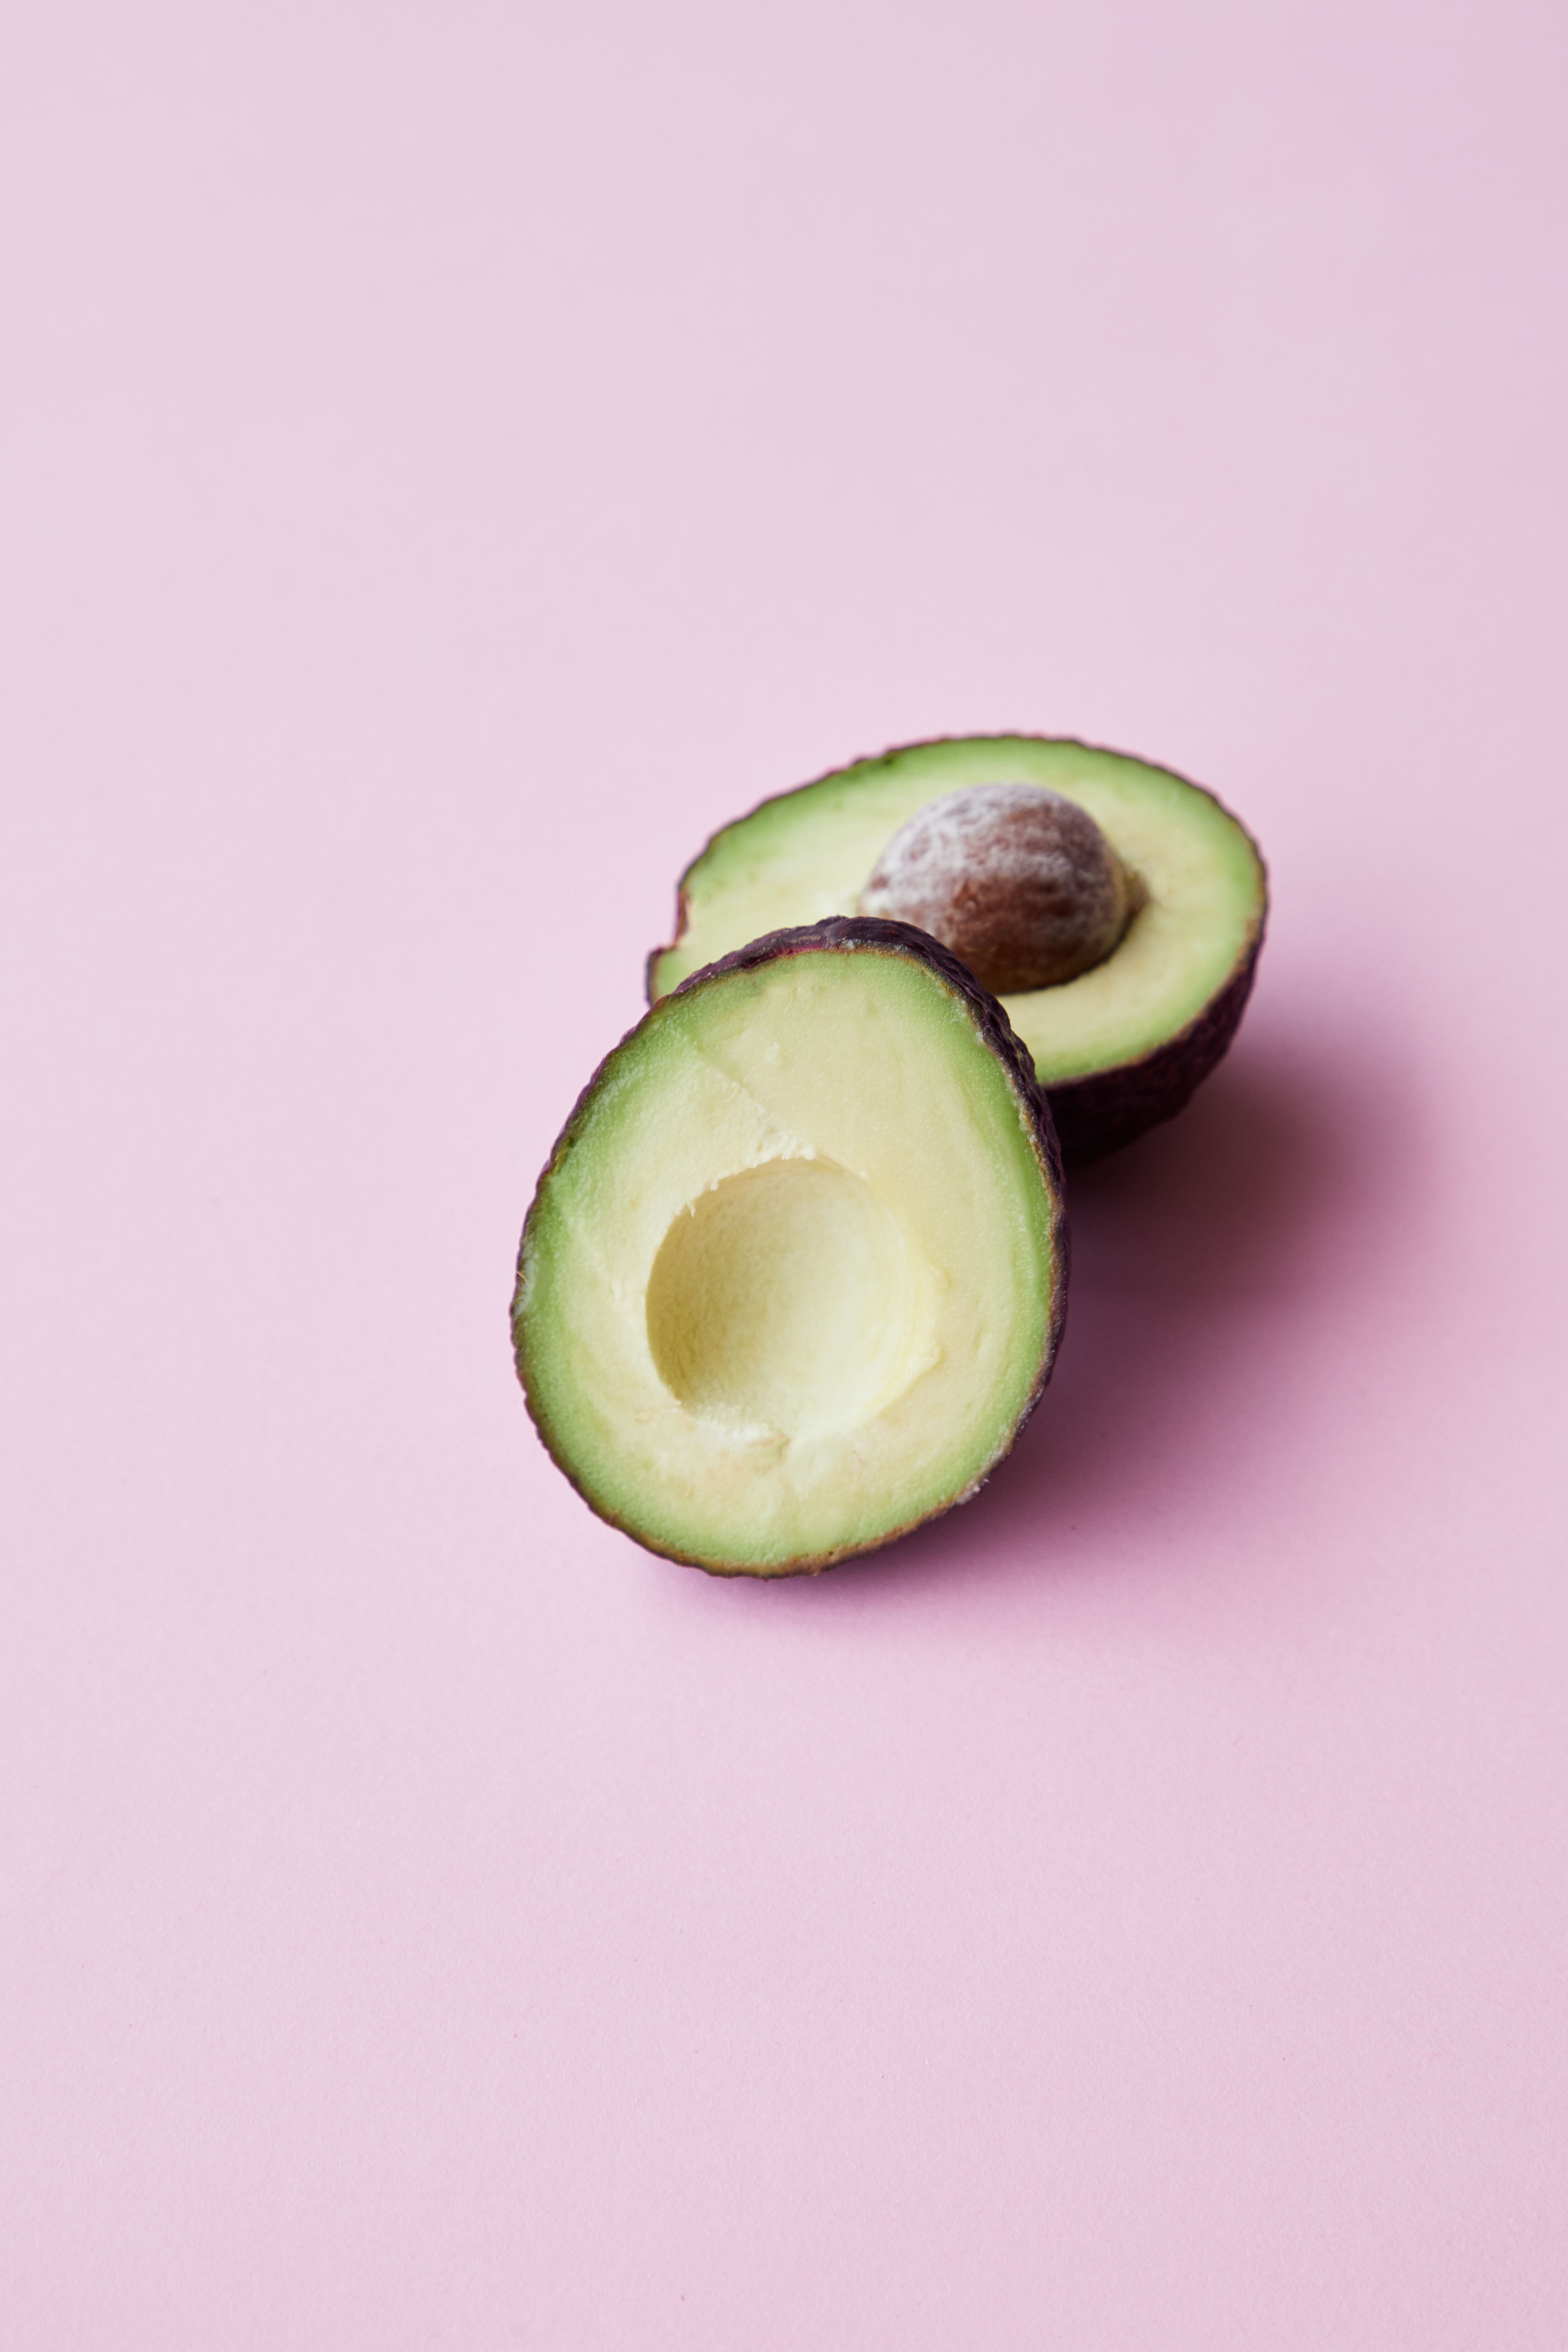 Halved ripe avocado placed on pink background · Free